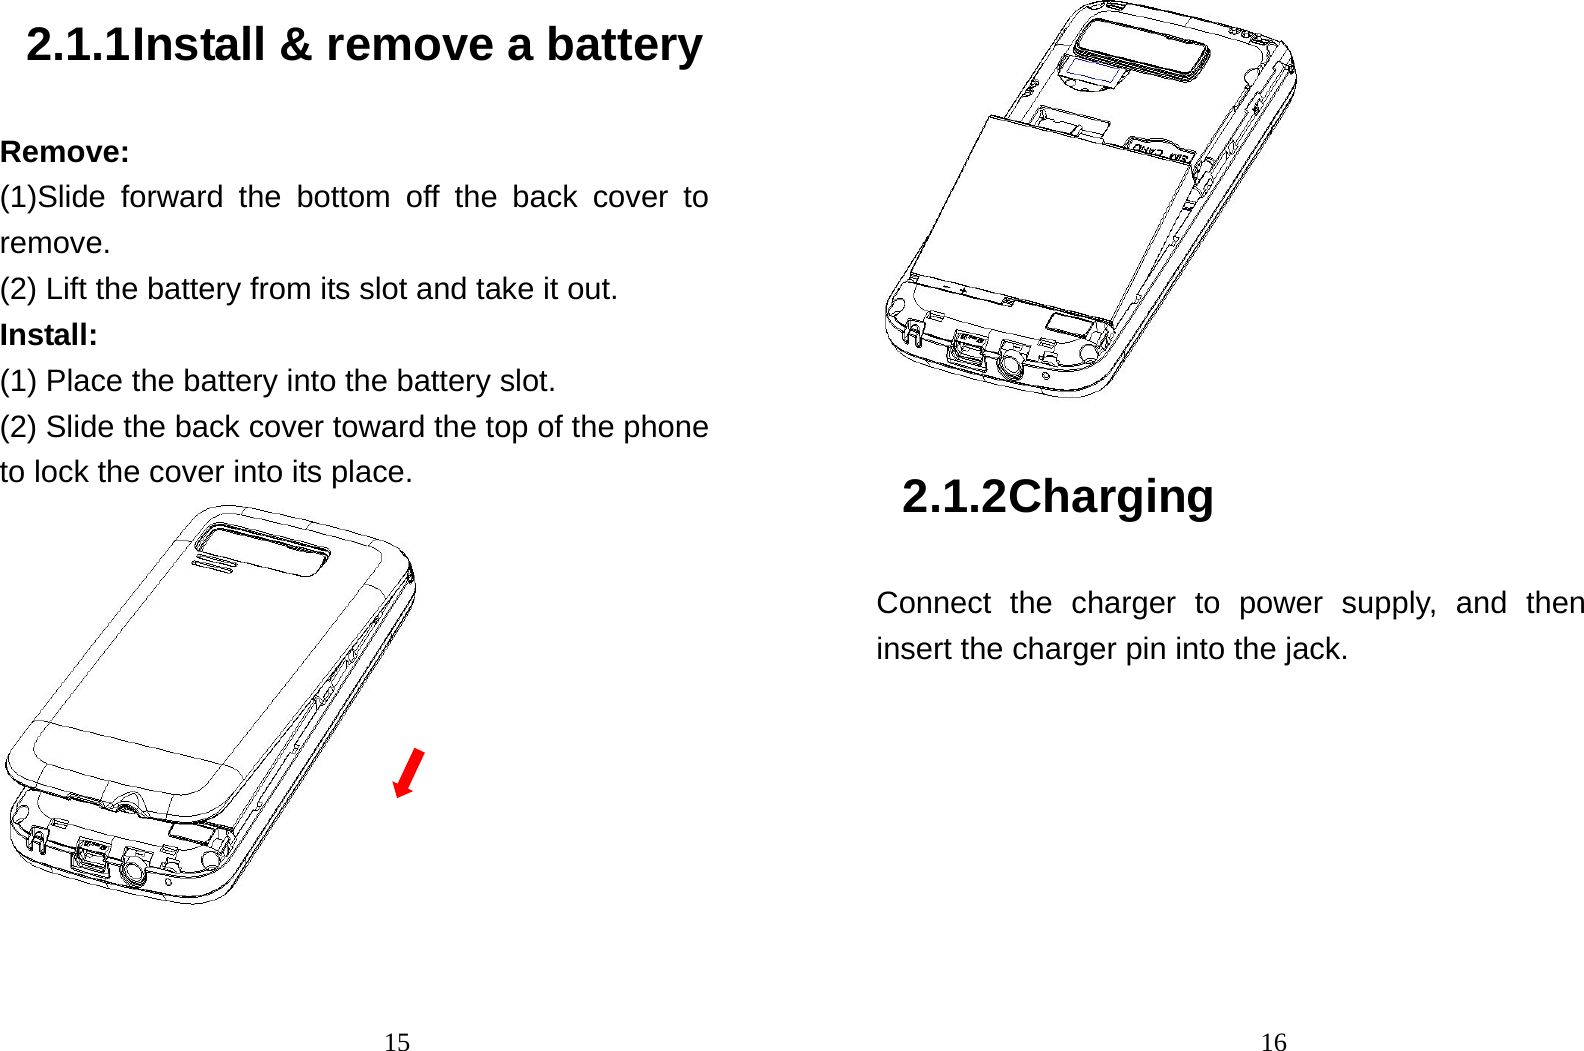                                152.1.1 Install &amp; remove a battery Remove: (1)Slide forward the bottom off the back cover to remove. (2) Lift the battery from its slot and take it out. Install:  (1) Place the battery into the battery slot. (2) Slide the back cover toward the top of the phone to lock the cover into its place.                                 16 2.1.2 Charging Connect the charger to power supply, and then insert the charger pin into the jack. 